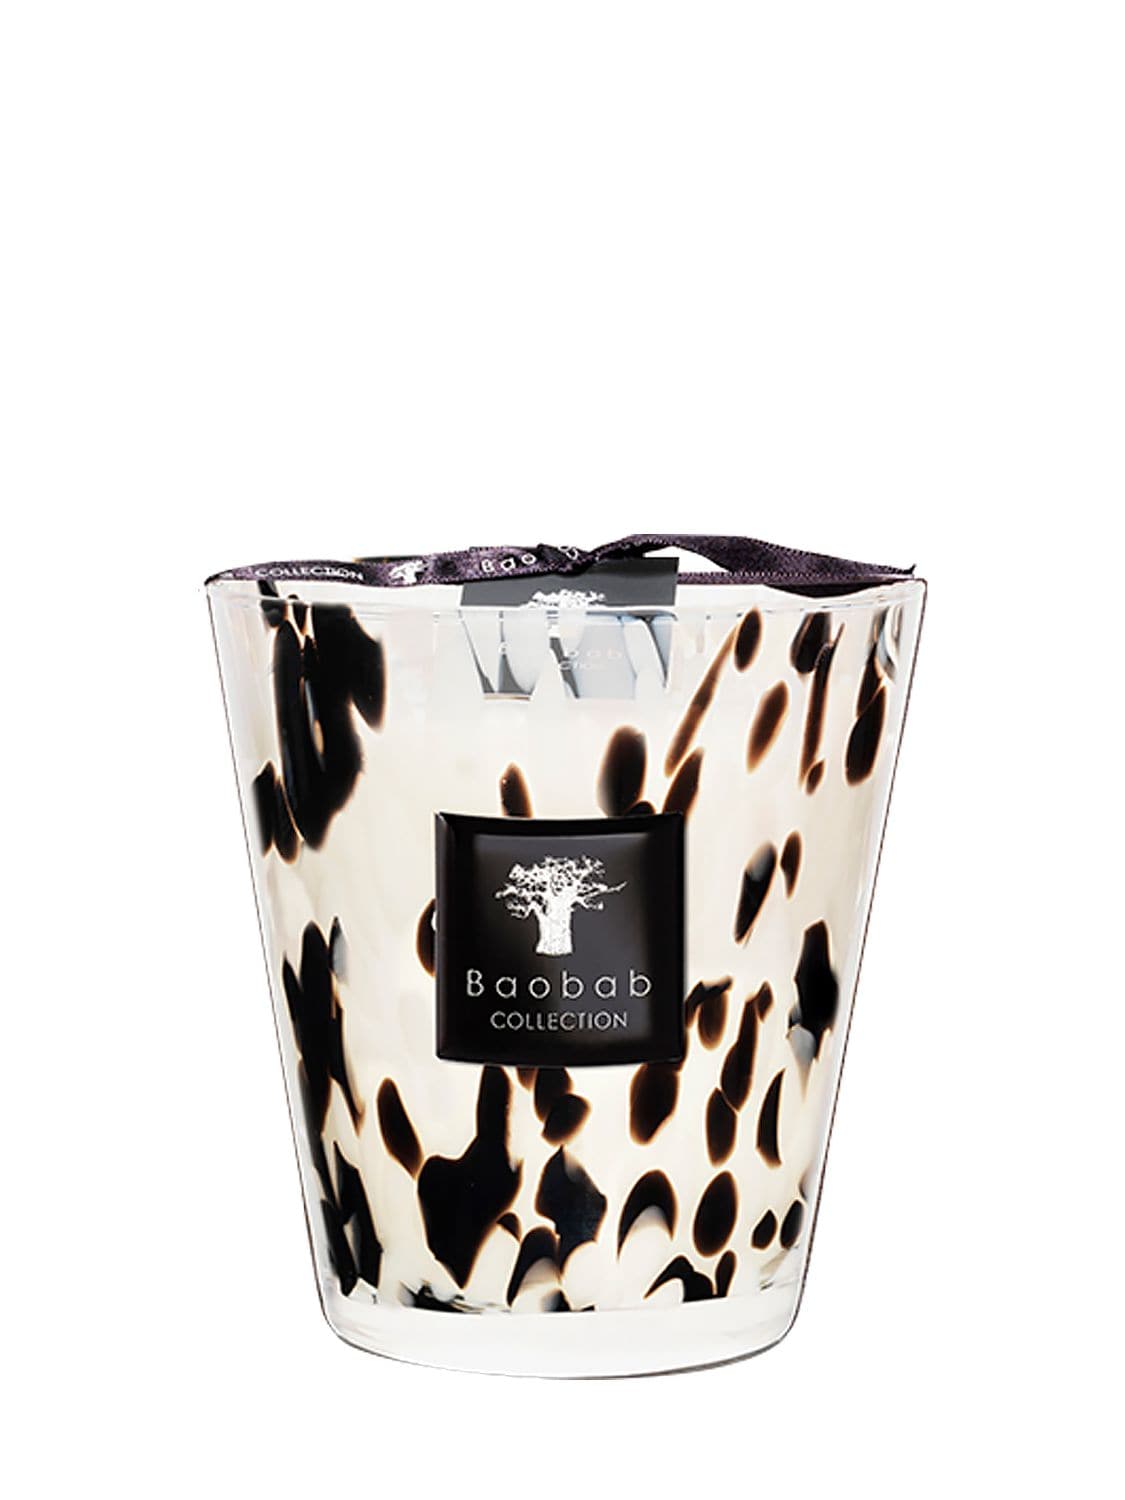 Image of 1.1kg Black Pearls Candle